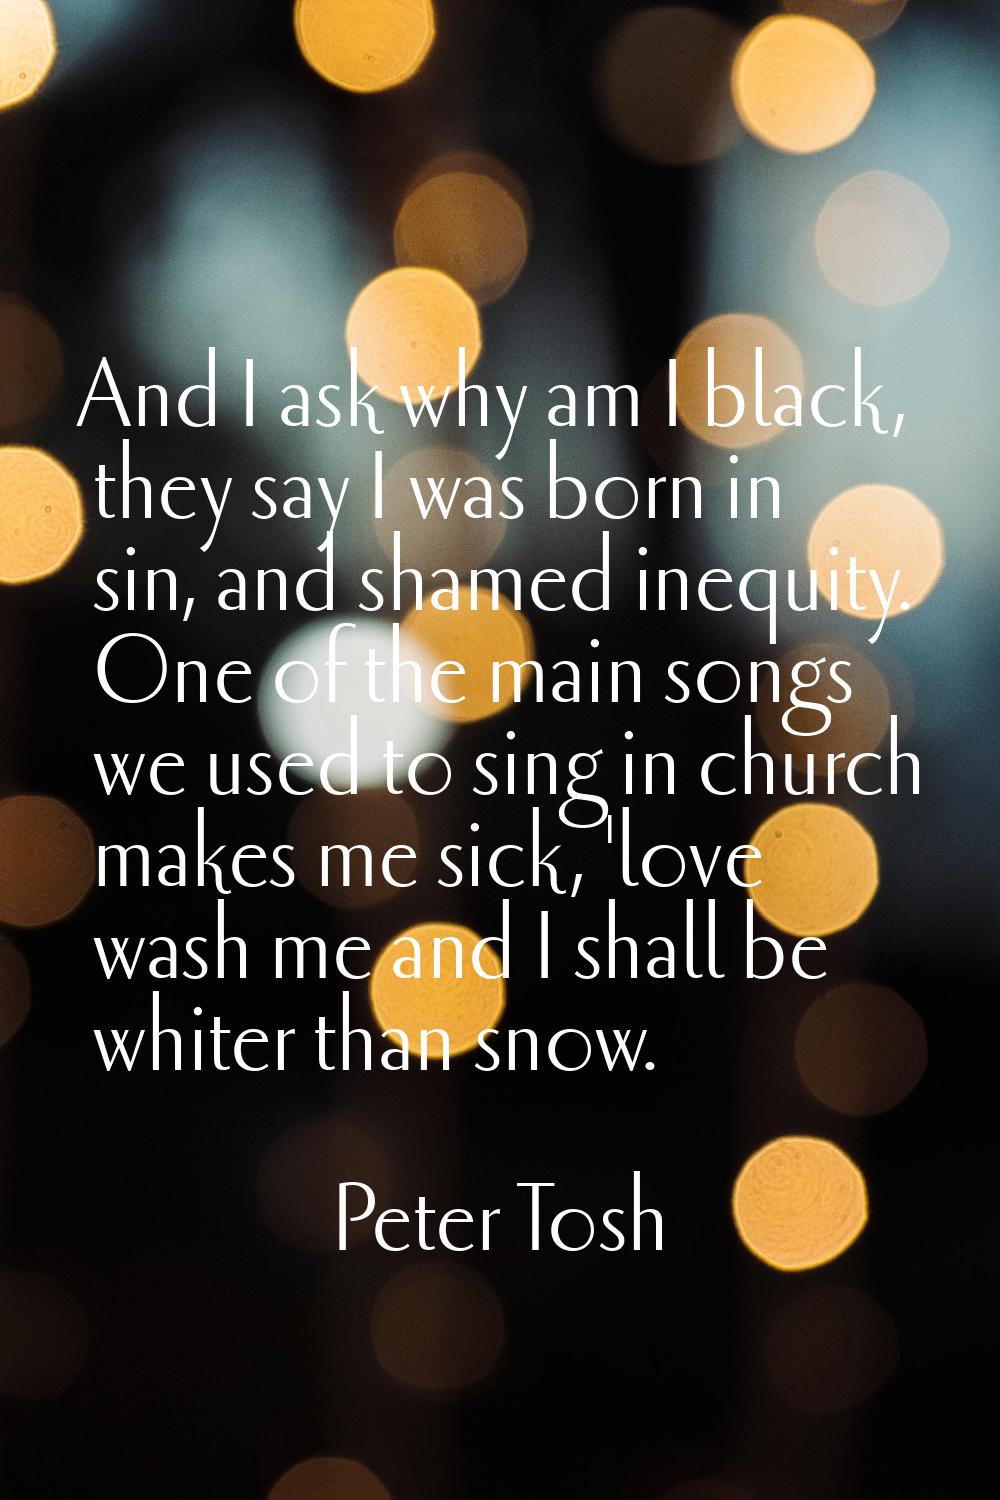 And I ask why am I black, they say I was born in sin, and shamed inequity. One of the main songs we